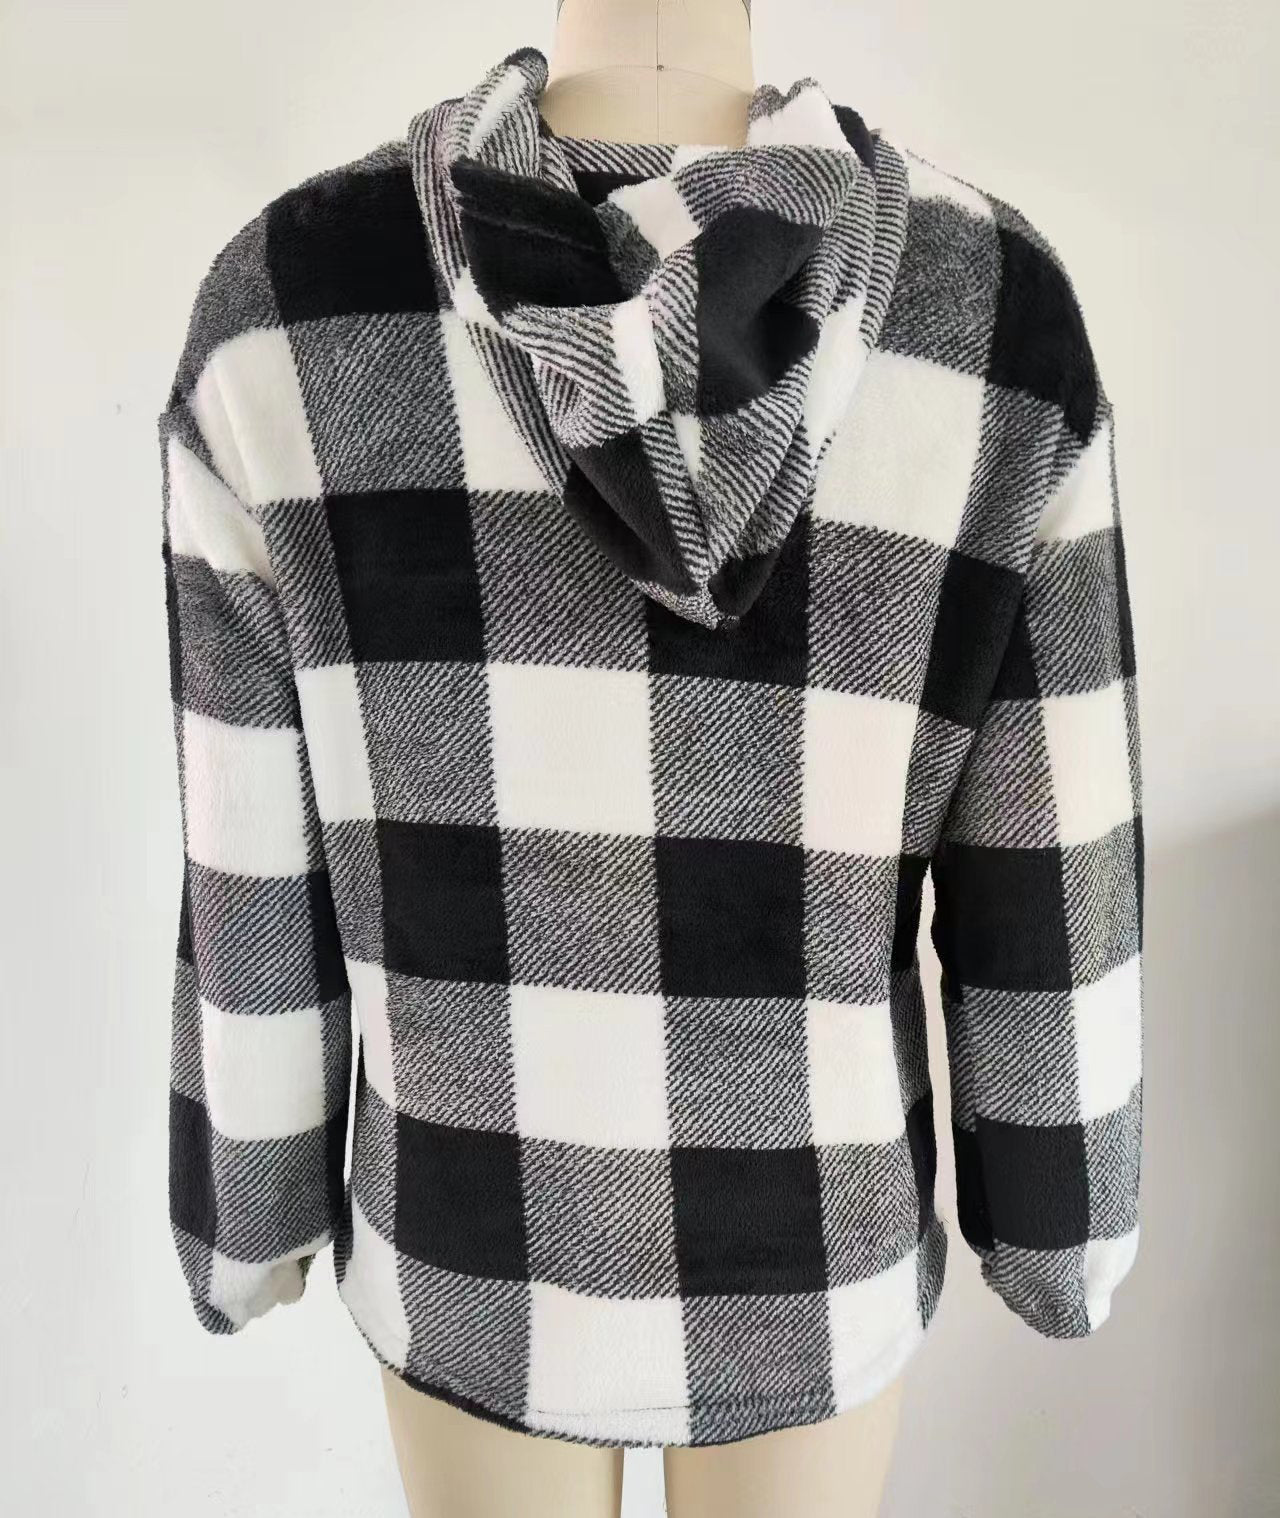 BamBam Autumn And Winter Plaid Button Hooded Loose Casual Hoodies Women's Clothing - BamBam